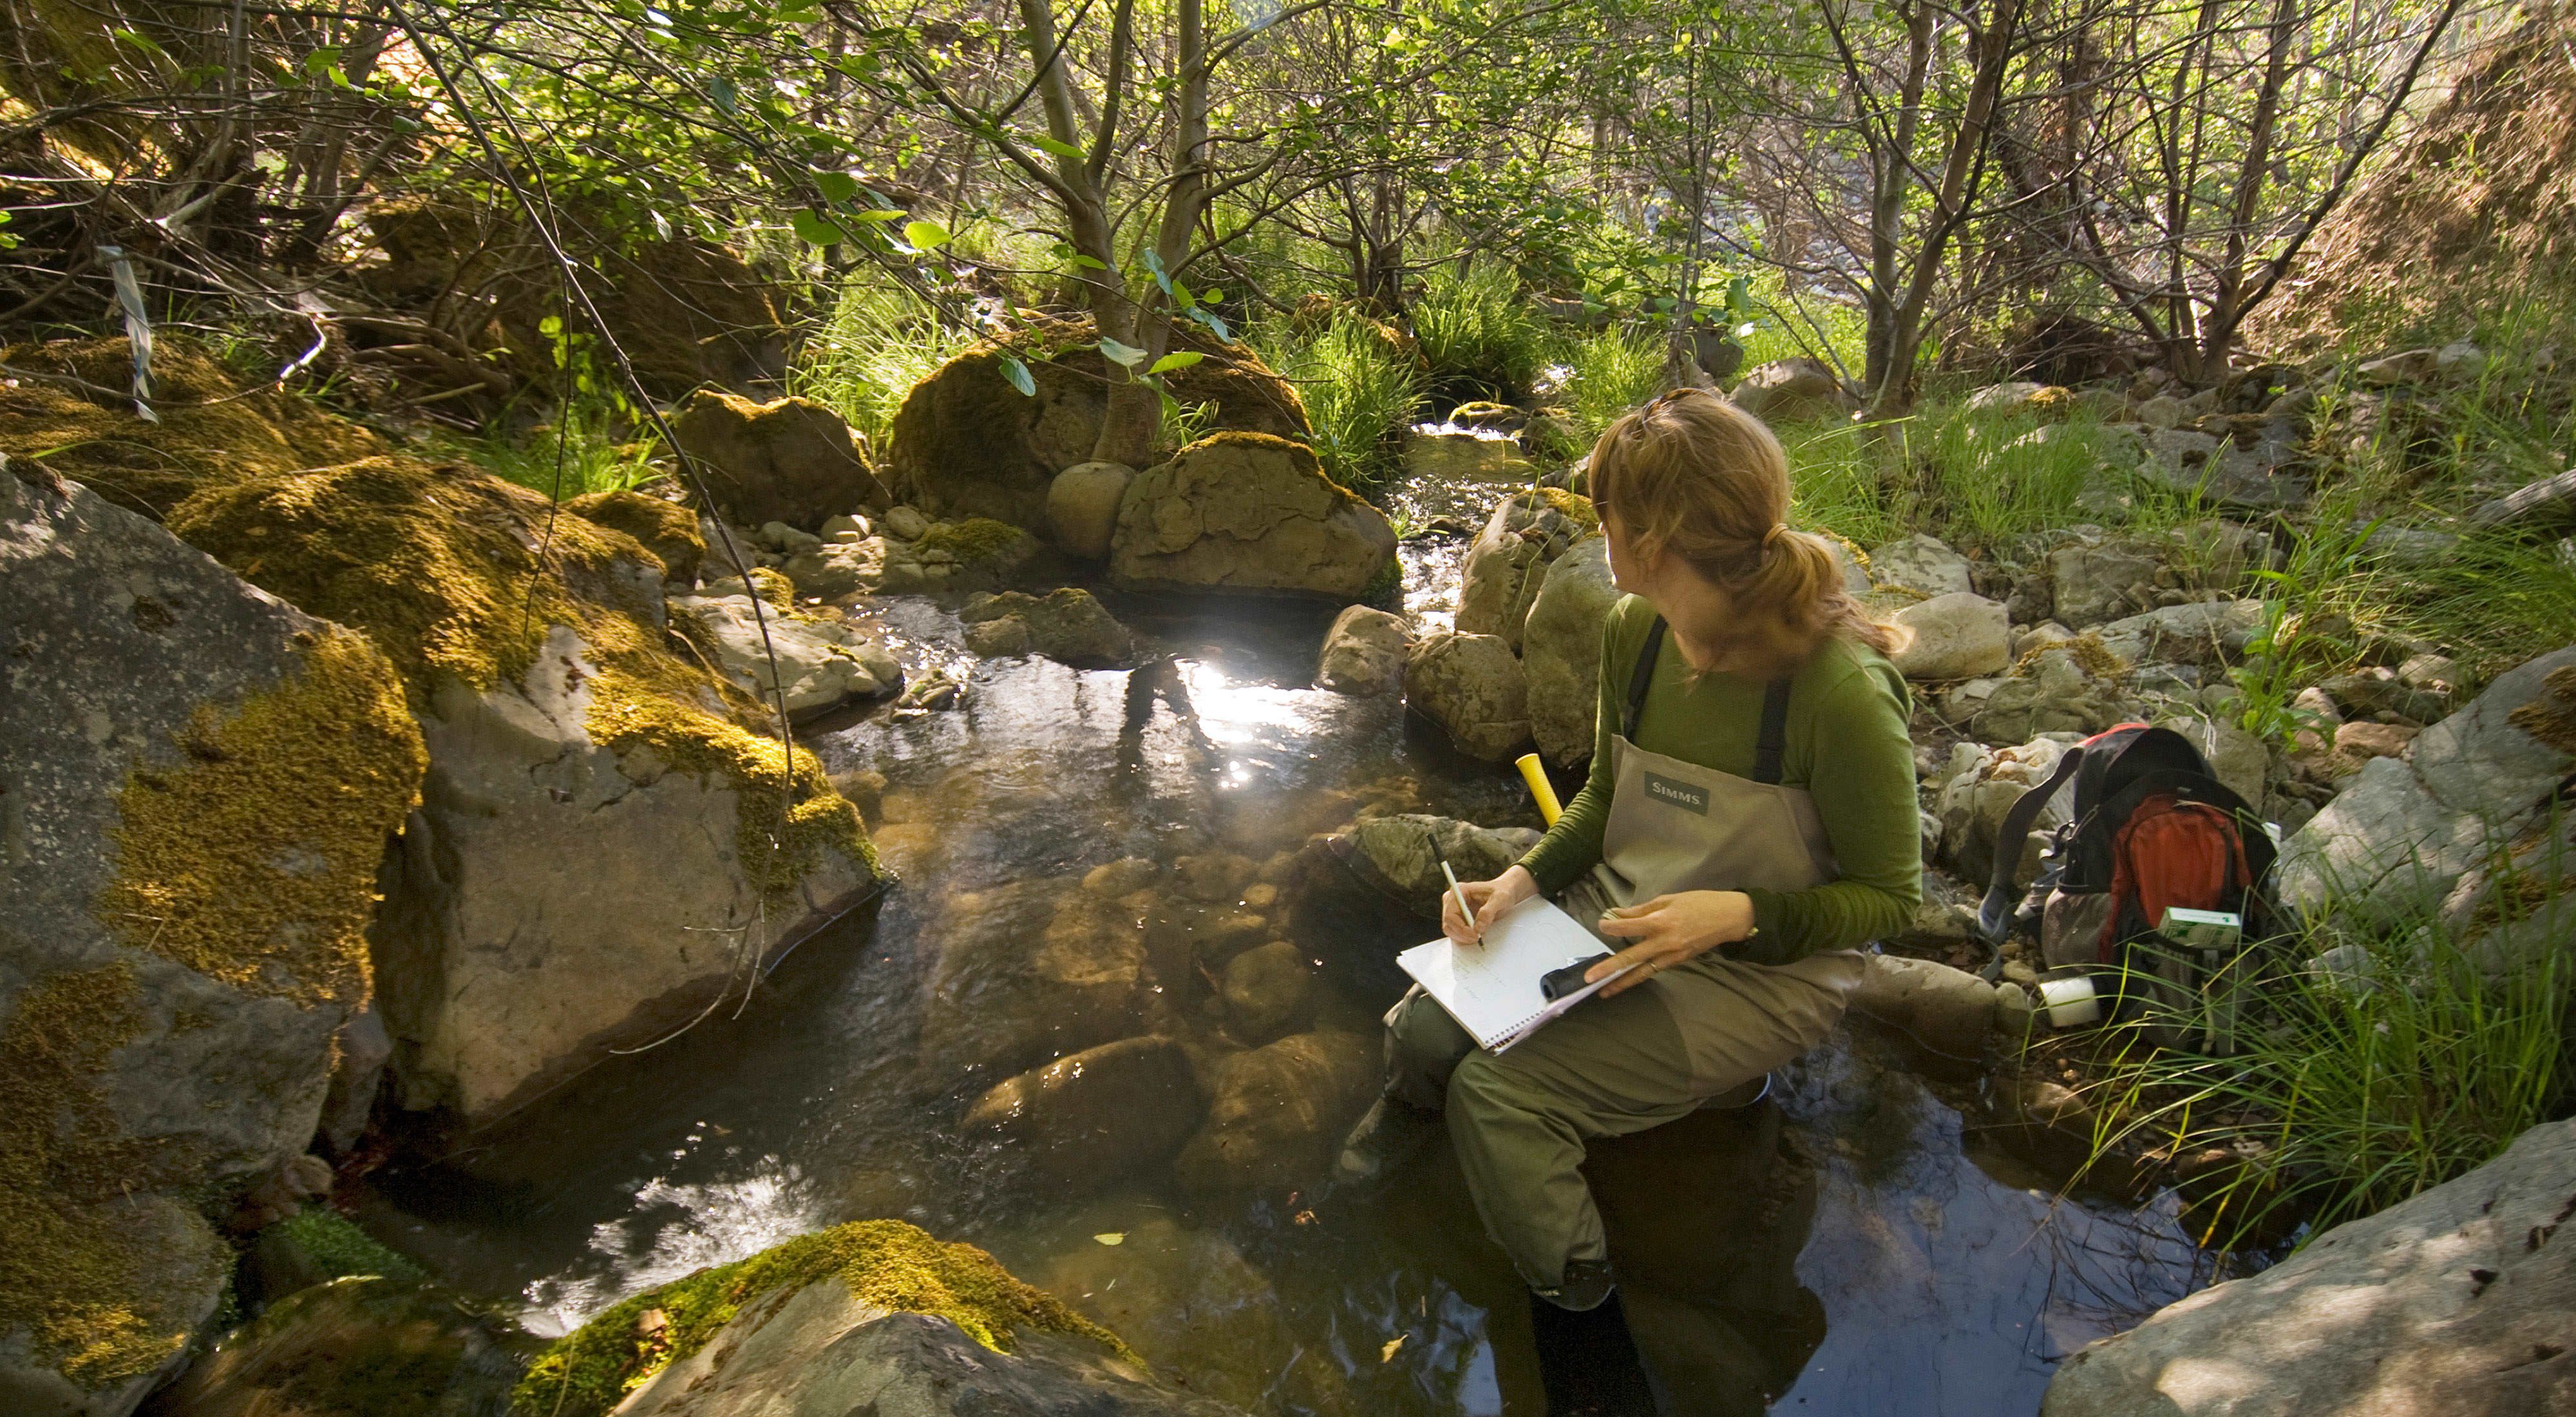 TNC scientist Jen Carah wears waders and sits at the edge of a rocky stream deep in the woods and takes notes.